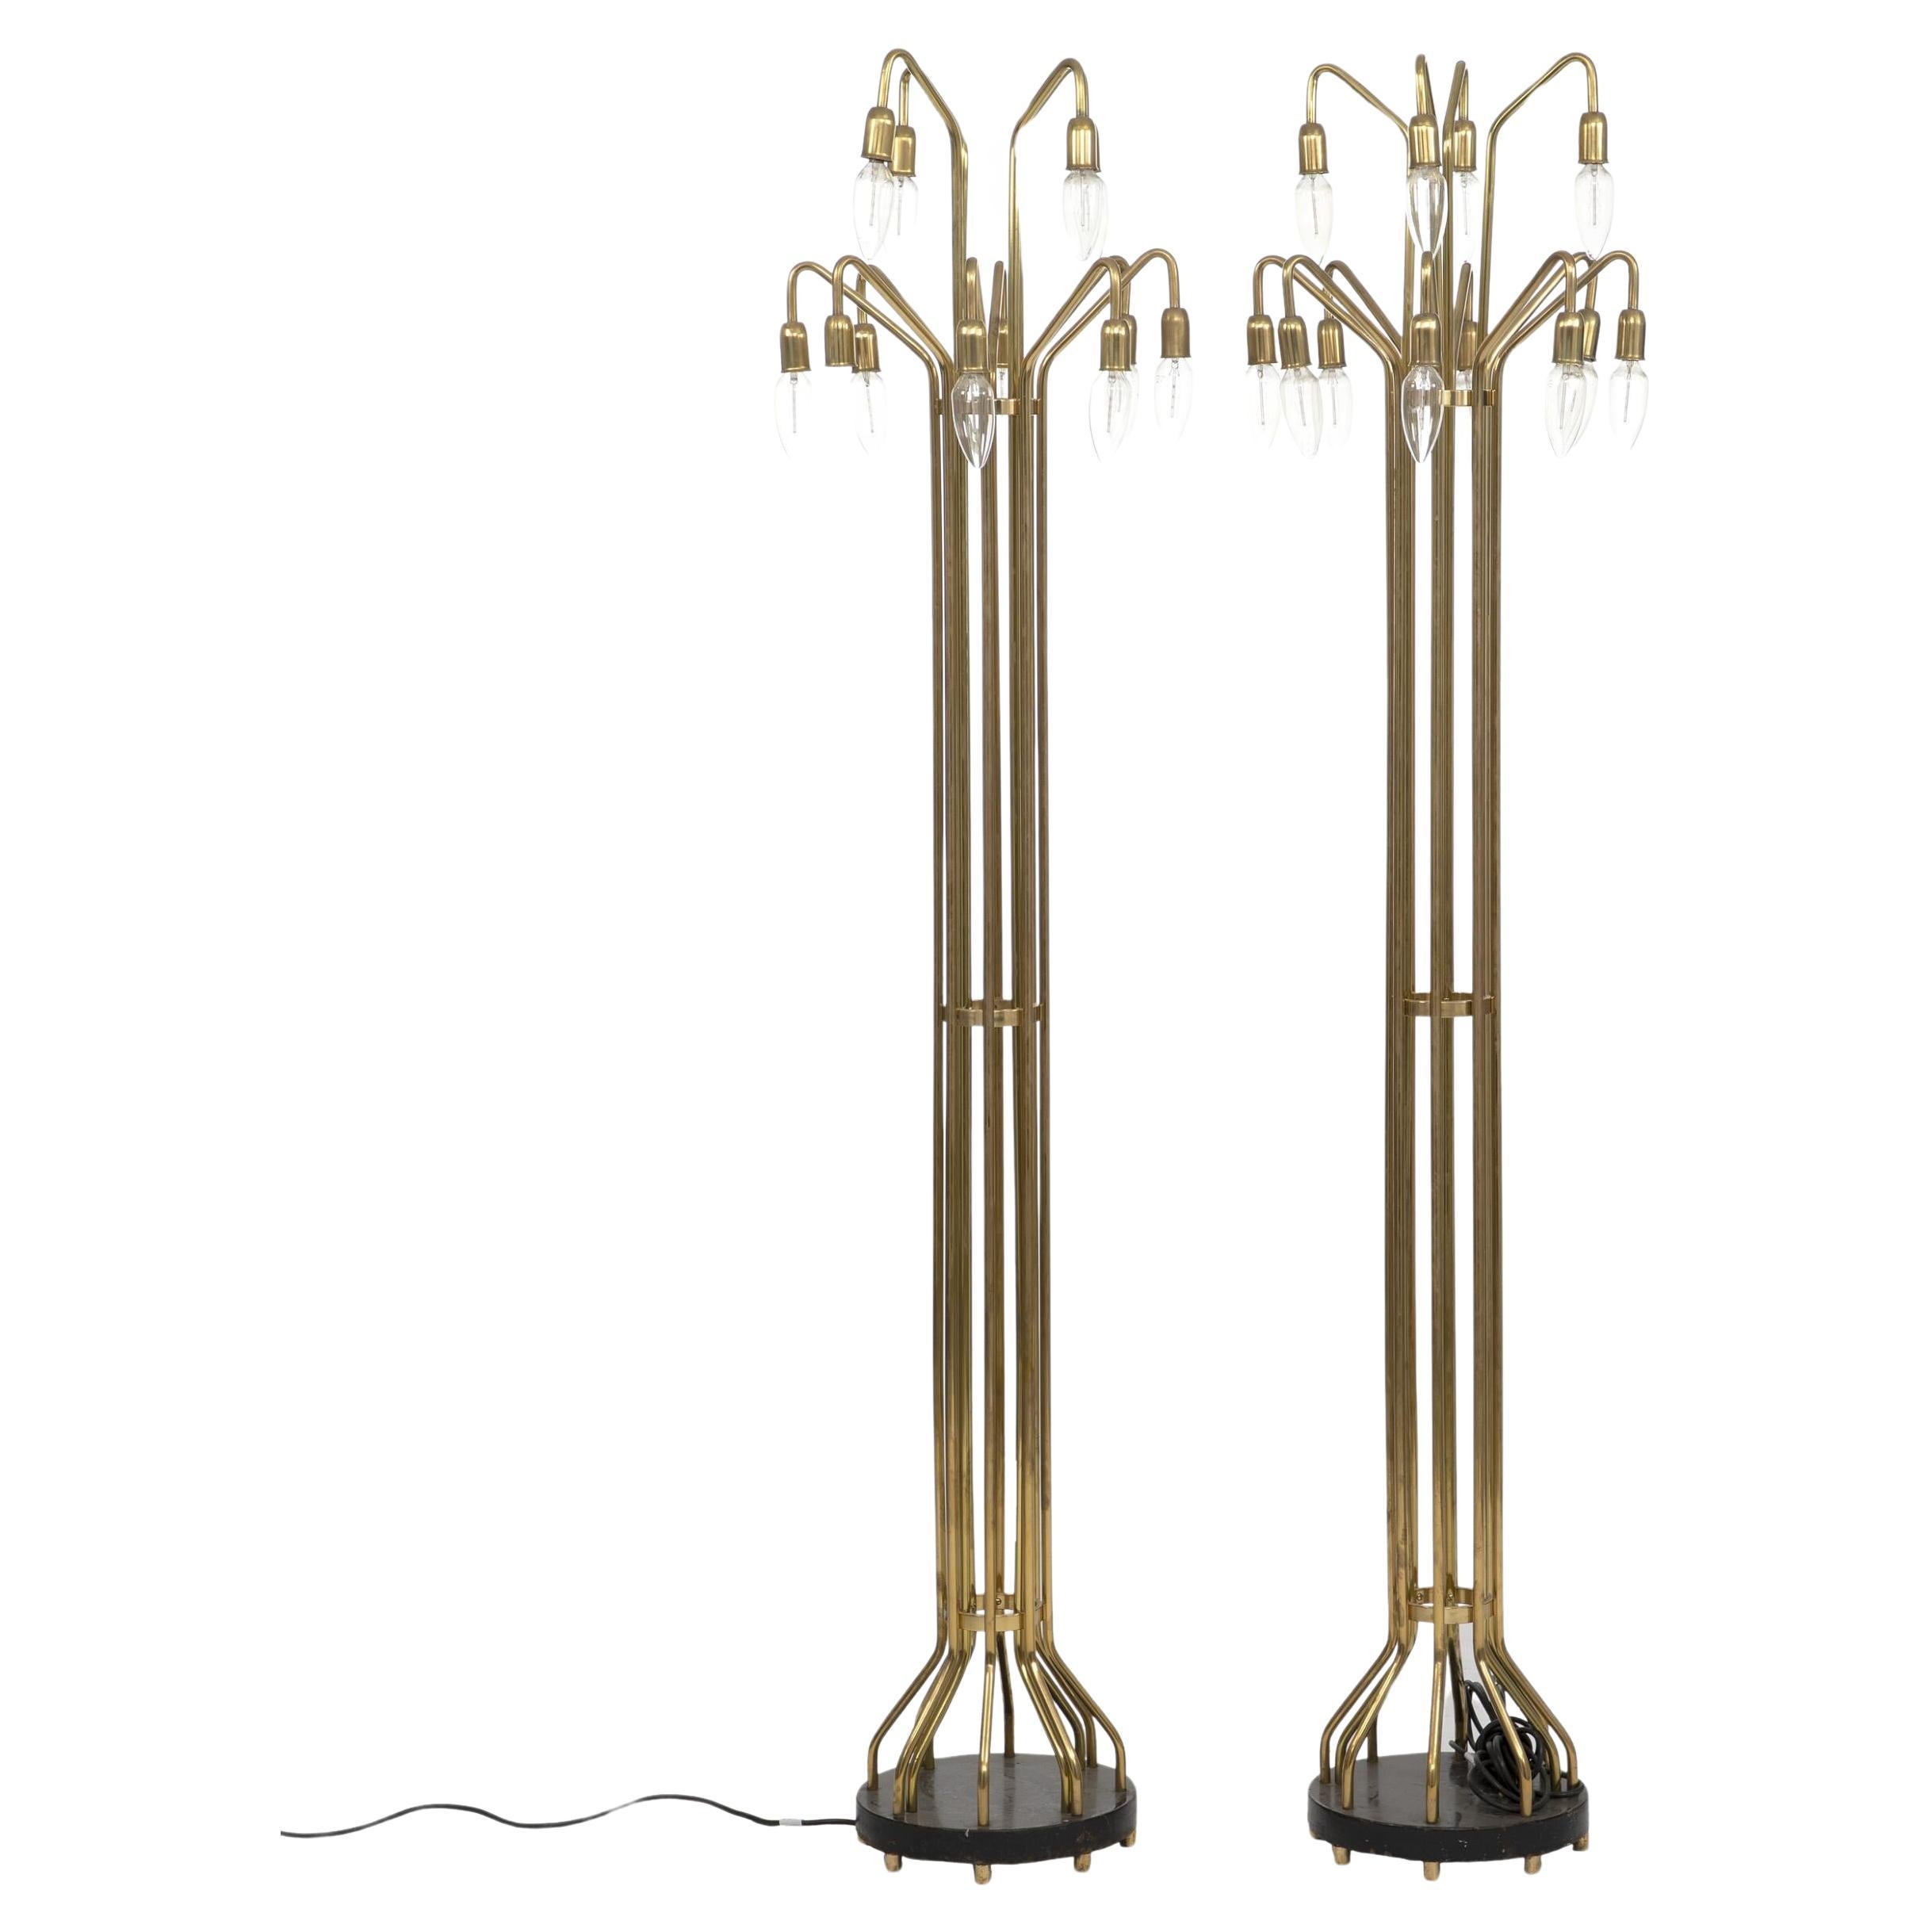 Pair of Midcentury Floor Lamps in Patinated Brass, Made in Denmark, 1950s